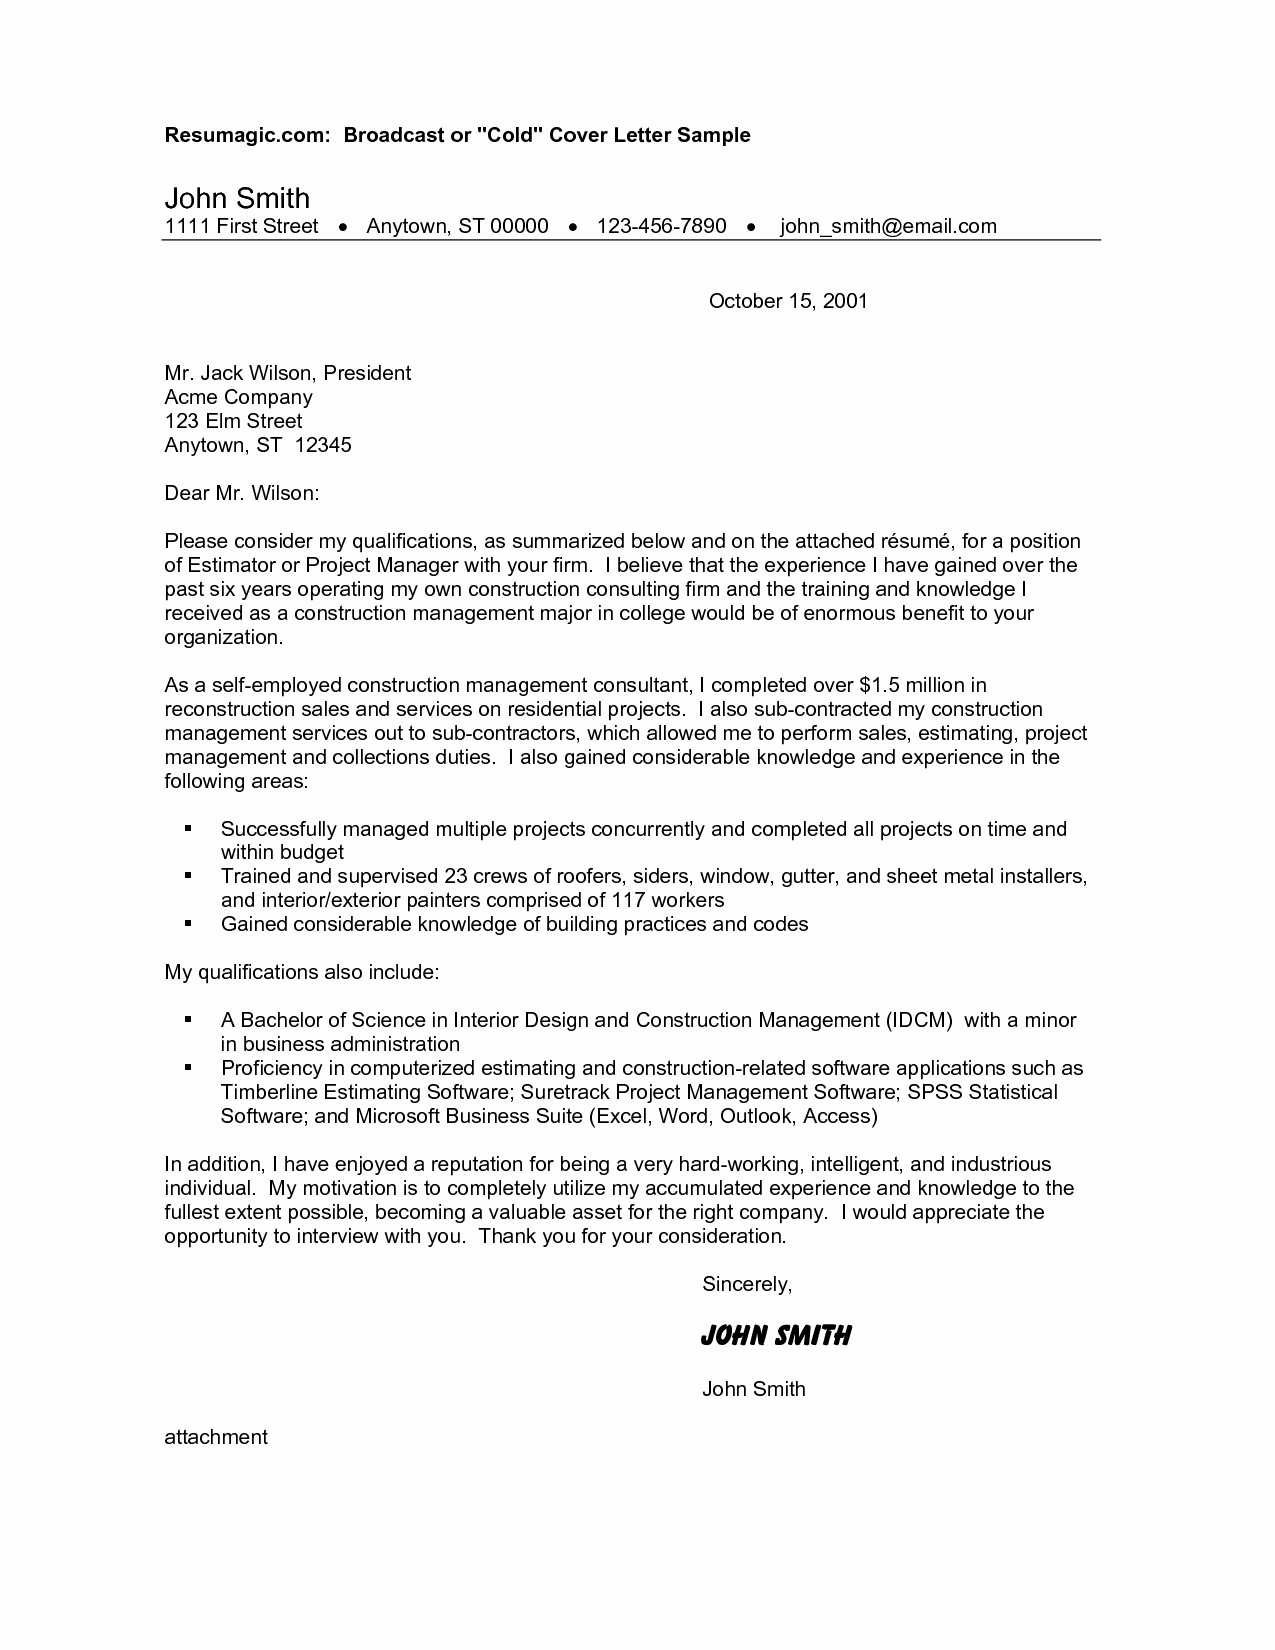 Sales Cover Letter Template - Fresh Sales Cover Letter Template